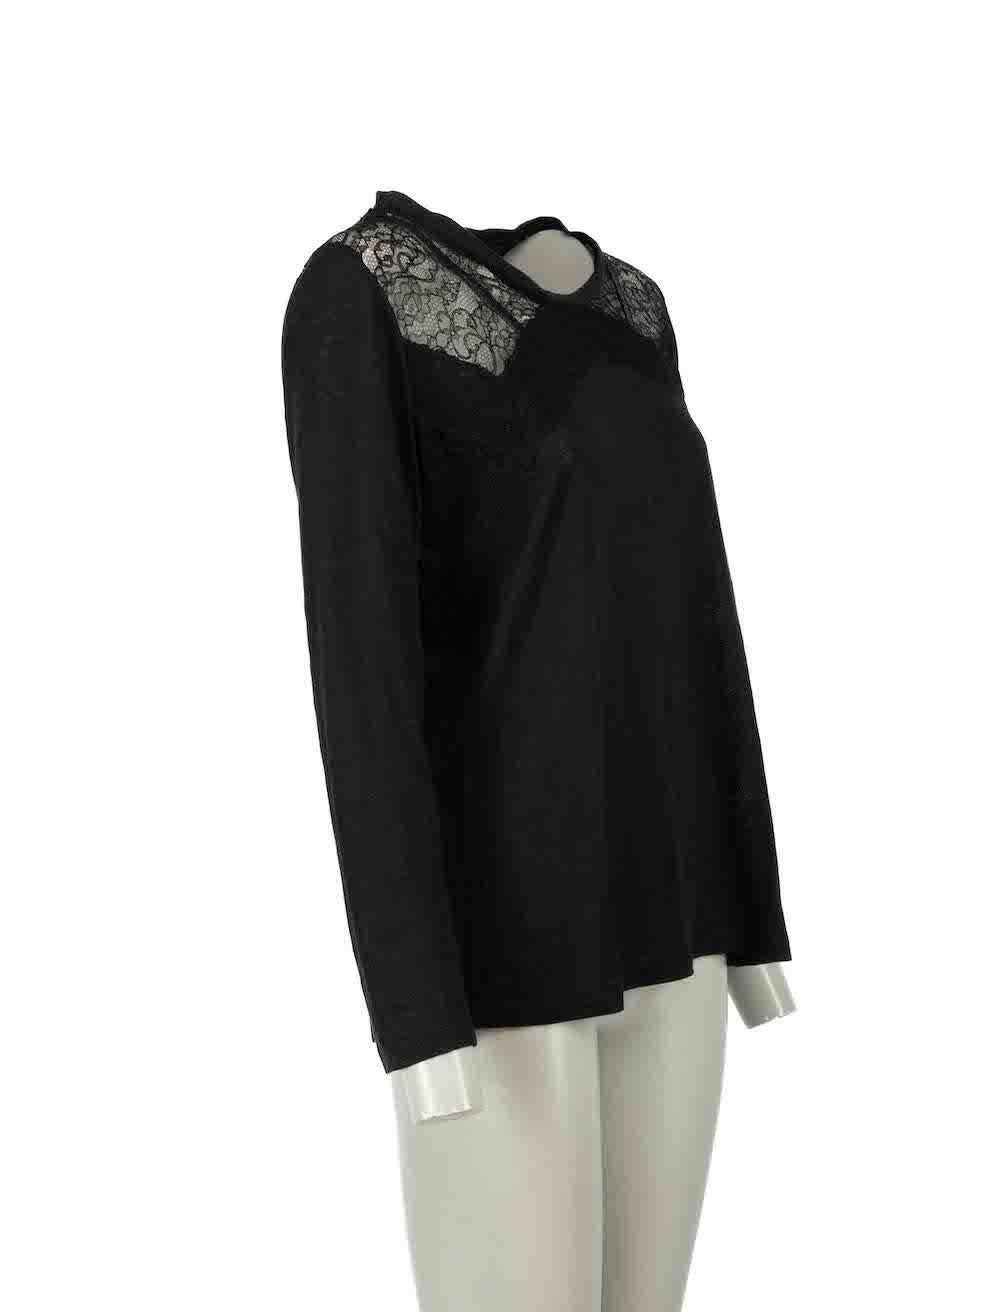 CONDITION is Very good. Hardly any visible wear to jumper is evident on this used Sandro designer resale item.
 
Details
Black
Linen
Long sleeves jumper
Knitted and stretchy
Slightly sheer
Round neckline 
Lace trim
 
Made in Portugal
 
Composition